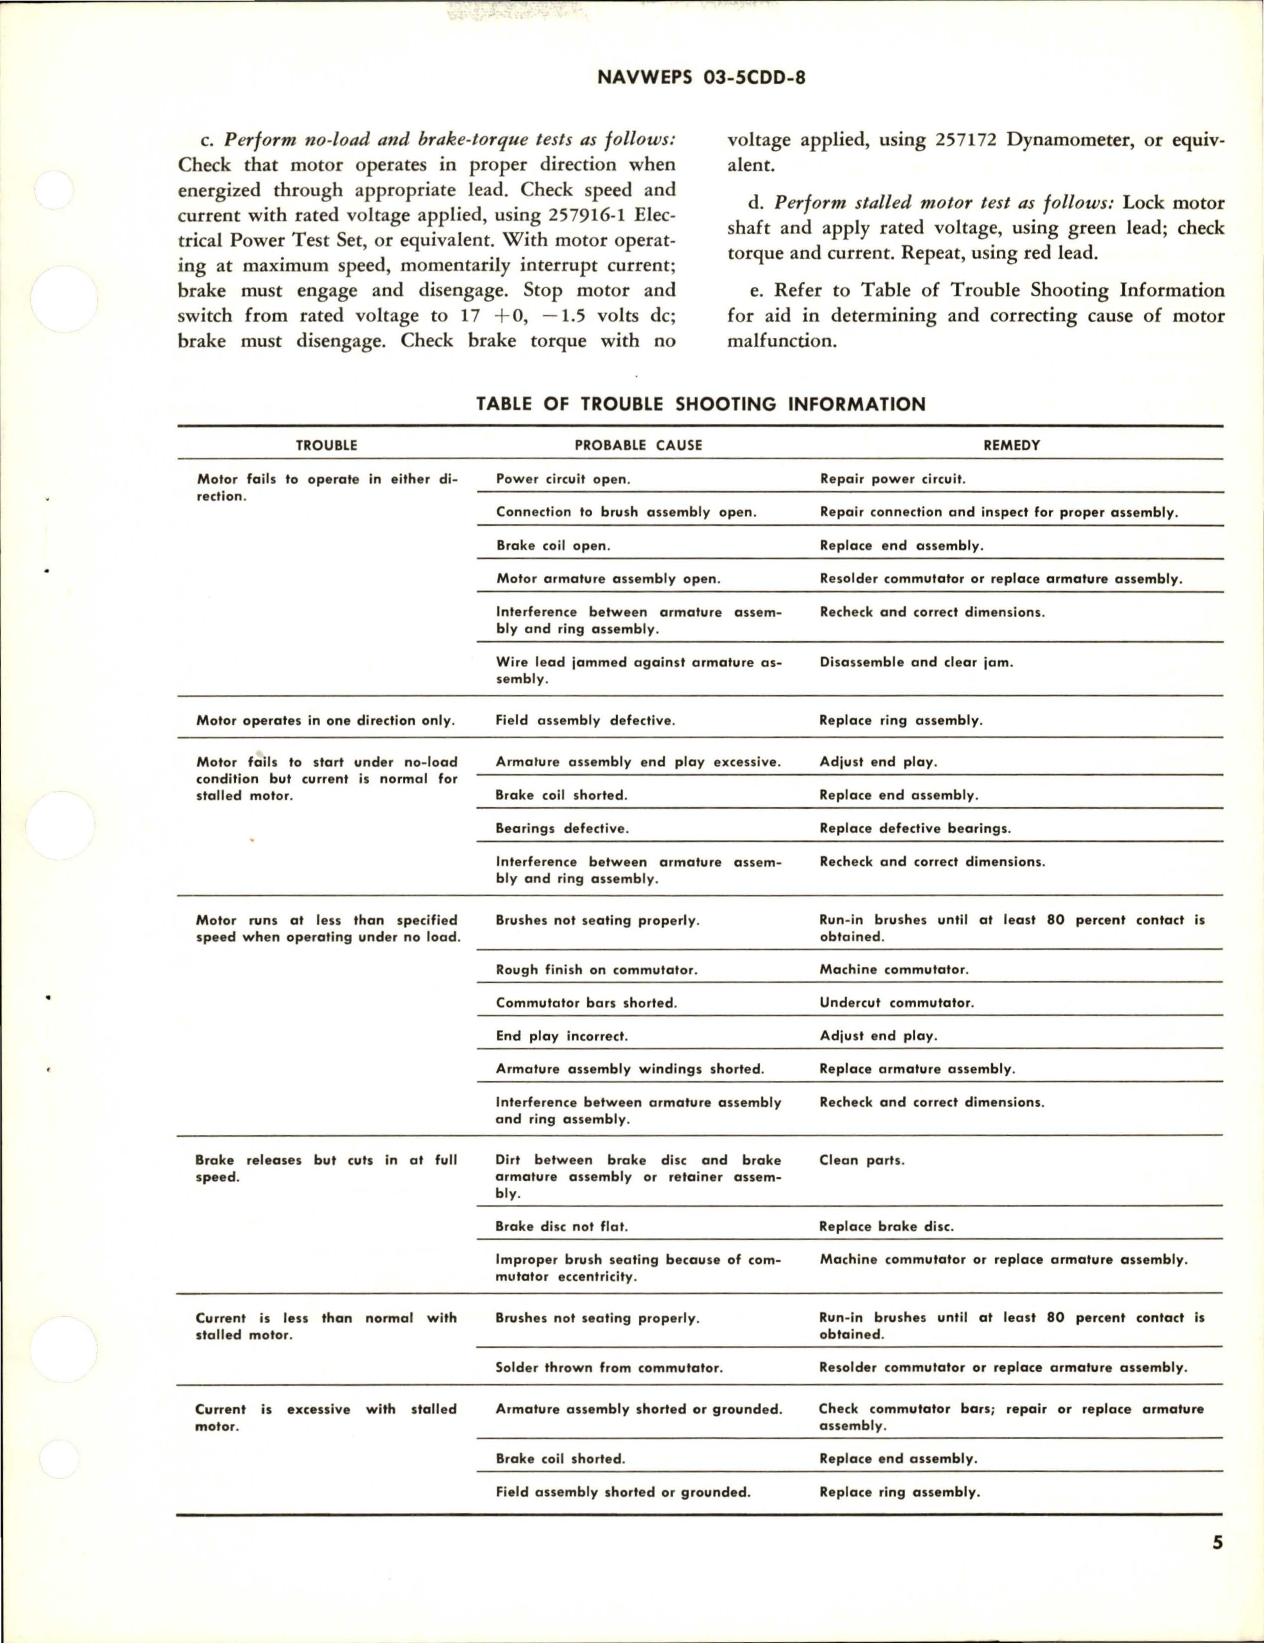 Sample page 5 from AirCorps Library document: Overhaul Instructions with Parts Breakdown for Direct Current Motors - Parts 36843 and 36843-1